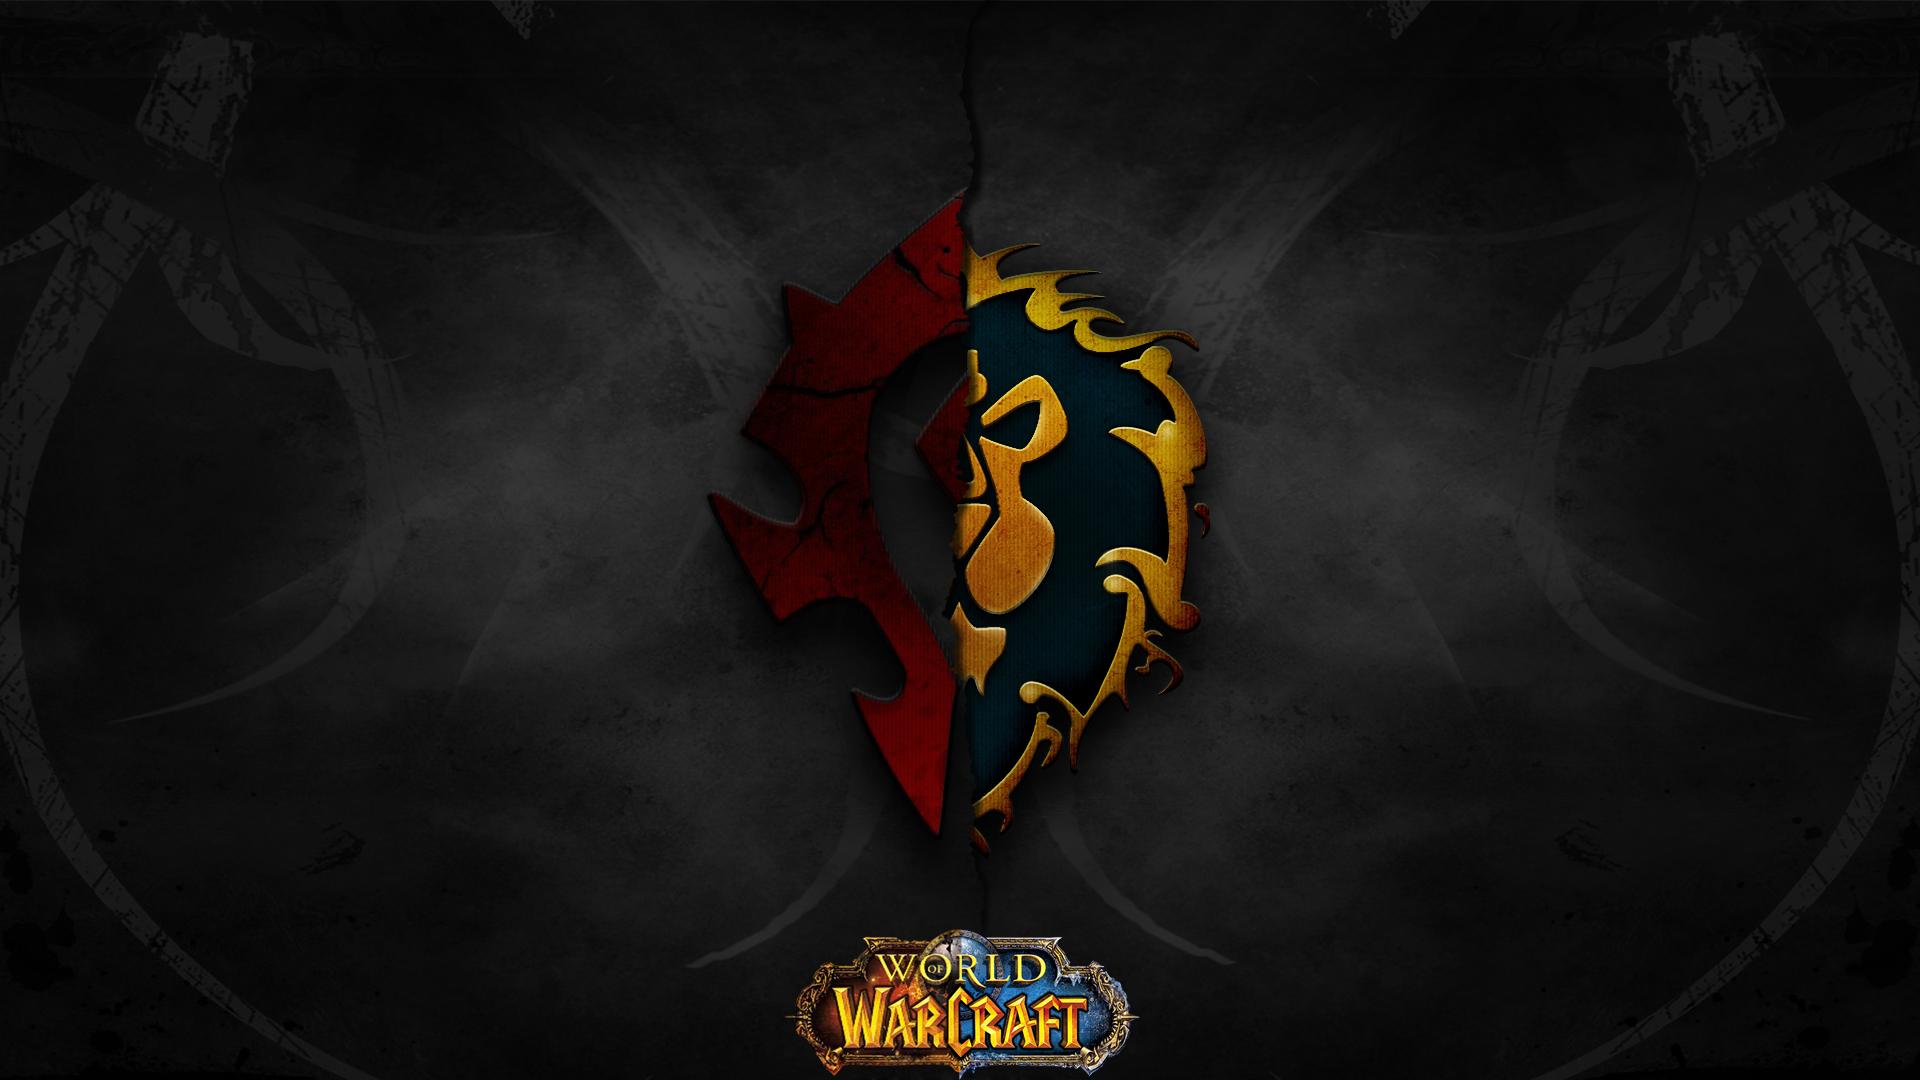 World of Warcraft Hey guys, I made two wallpapers with the